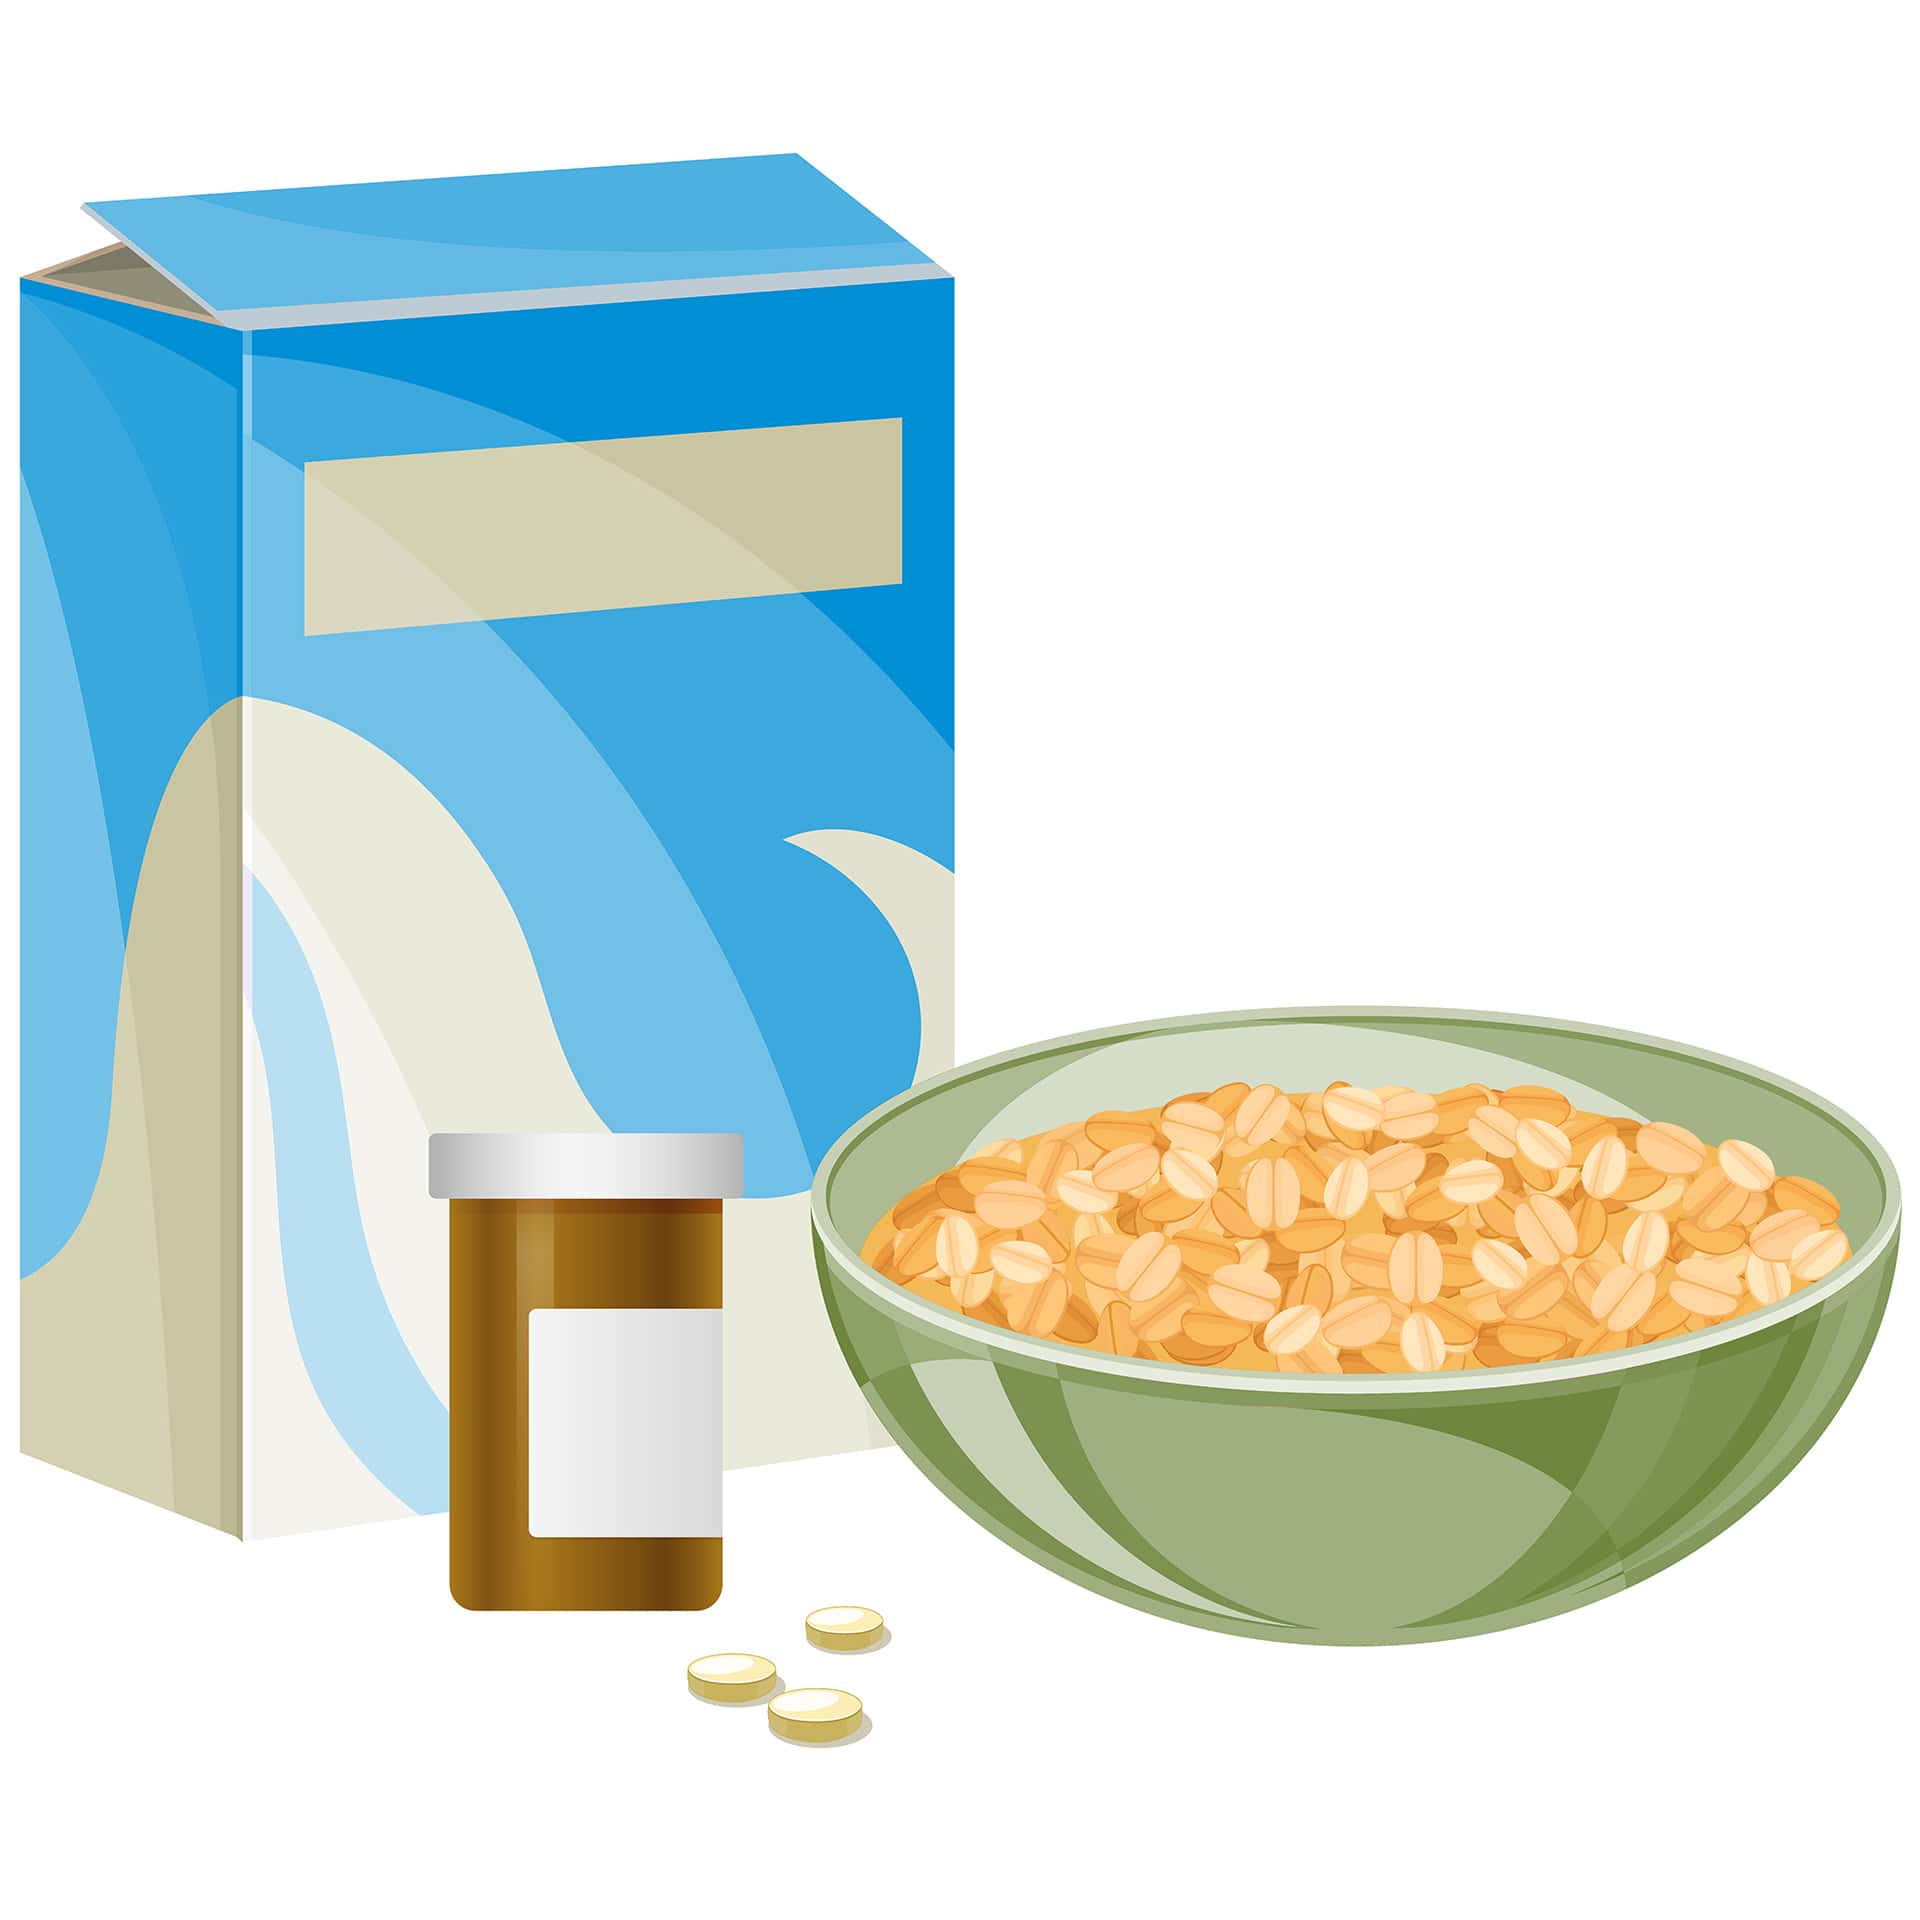 A graphic of a cereal bowl and box